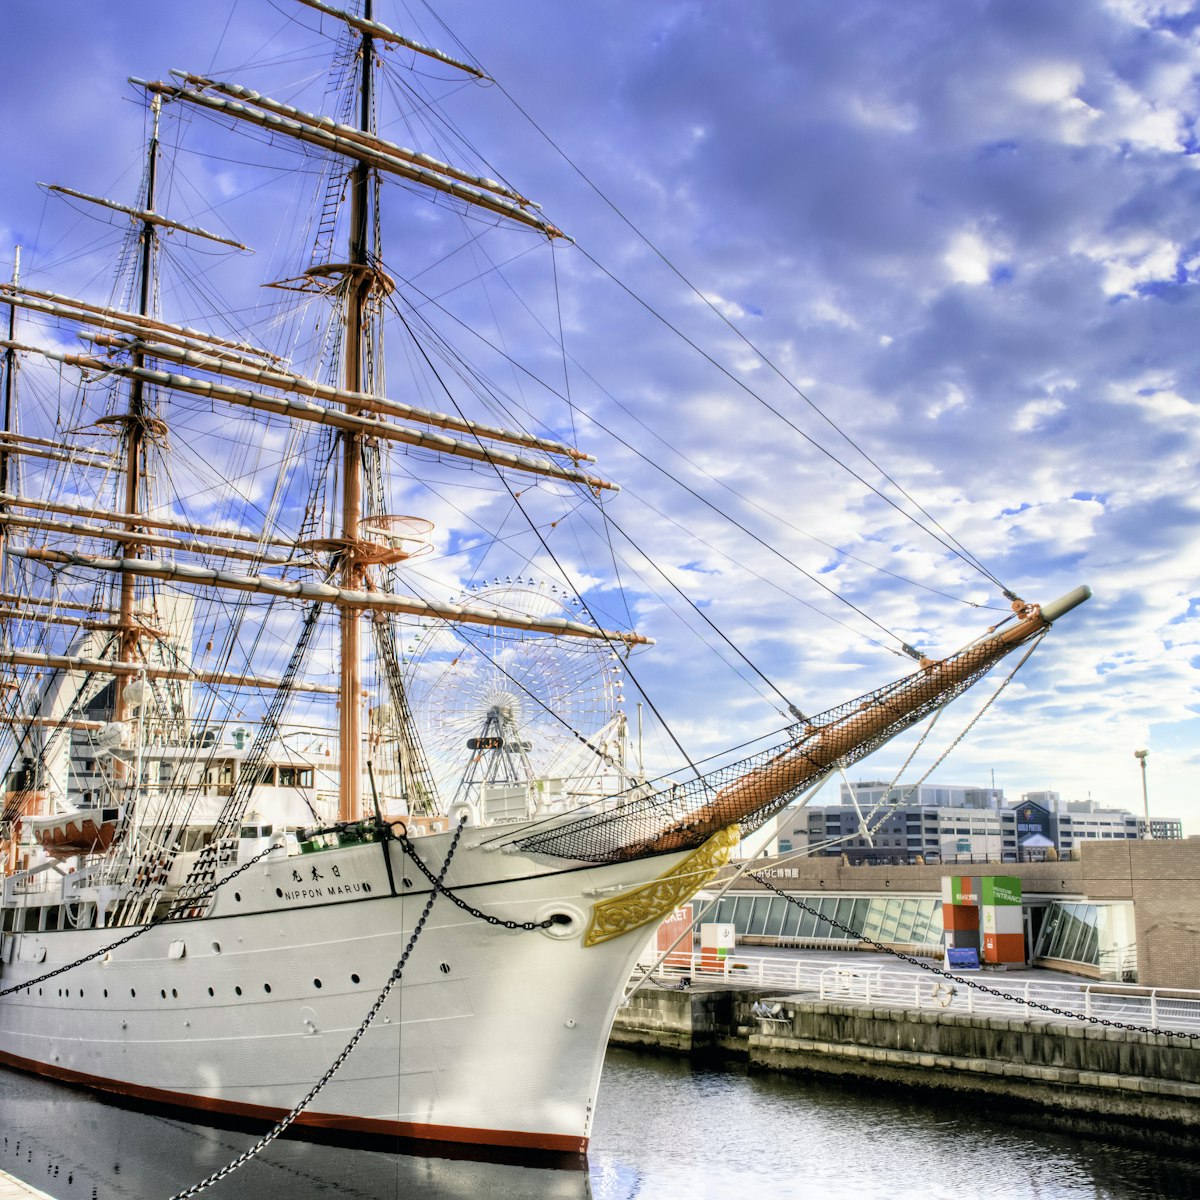 Sailing ship in Yokohama, Japan. She is known as the Nippon Maru.; Shutterstock ID 90362989; Your name (First / Last): Laura Crawford; GL account no.: 65050; Netsuite department name: Online Editorial; Full Product or Project name including edition: BiA images Yokohama, Takayama, Kamakura